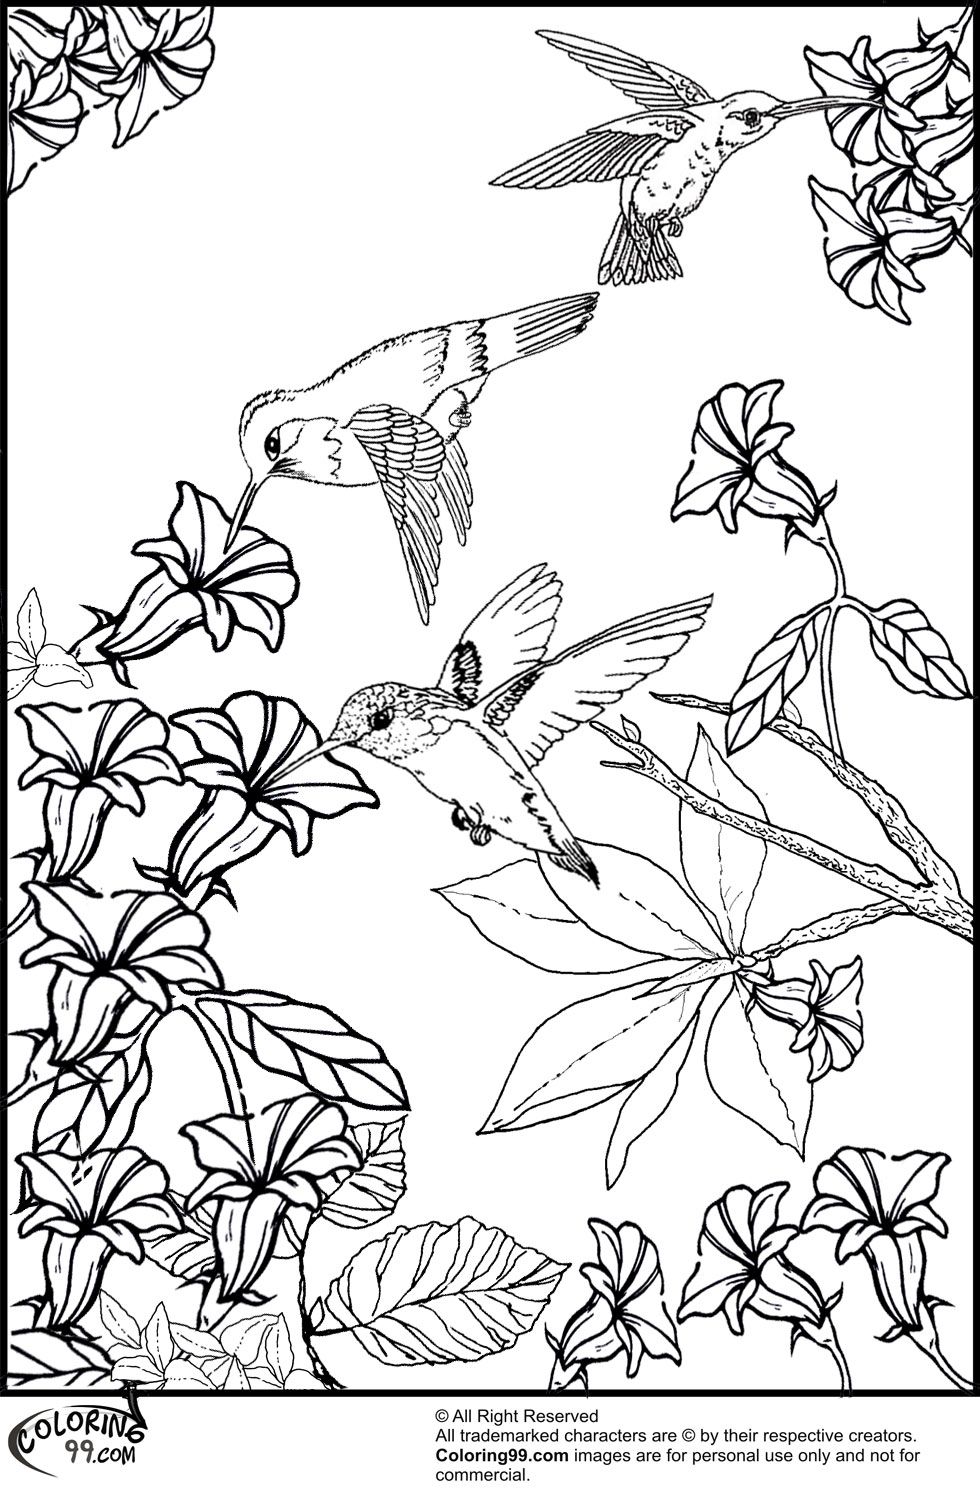 The-Pics.com - Images: Hummingbird Flower Coloring Pages